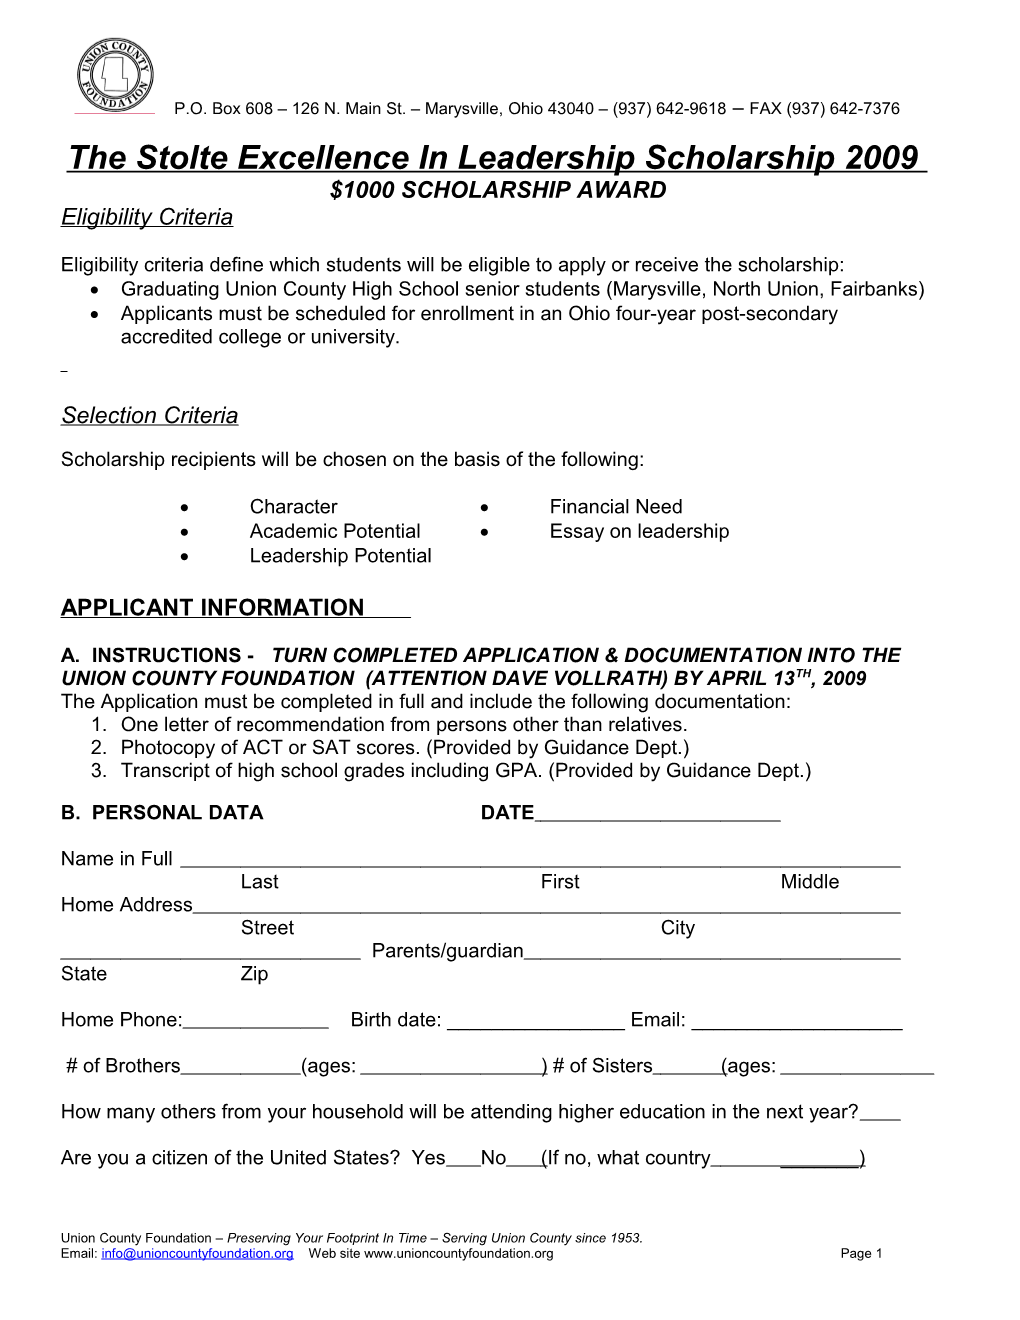 The Stolte Excellence in Leadership Scholarship 2009